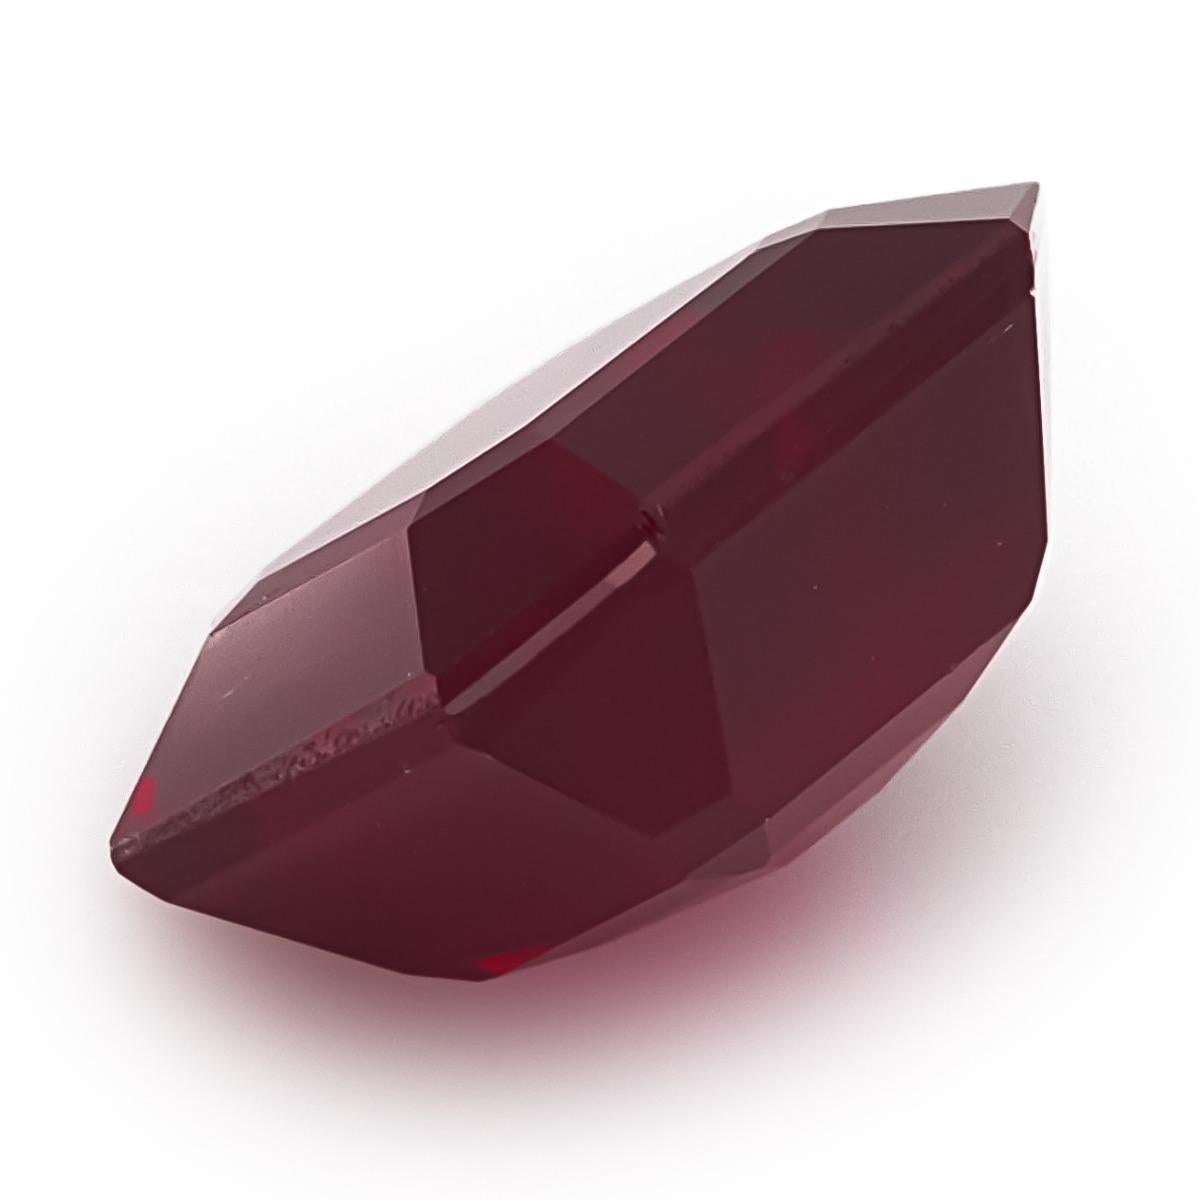 Brilliant Cut GIA Certified 2.49 Carat Natural Unheated Mozambique Ruby For Sale